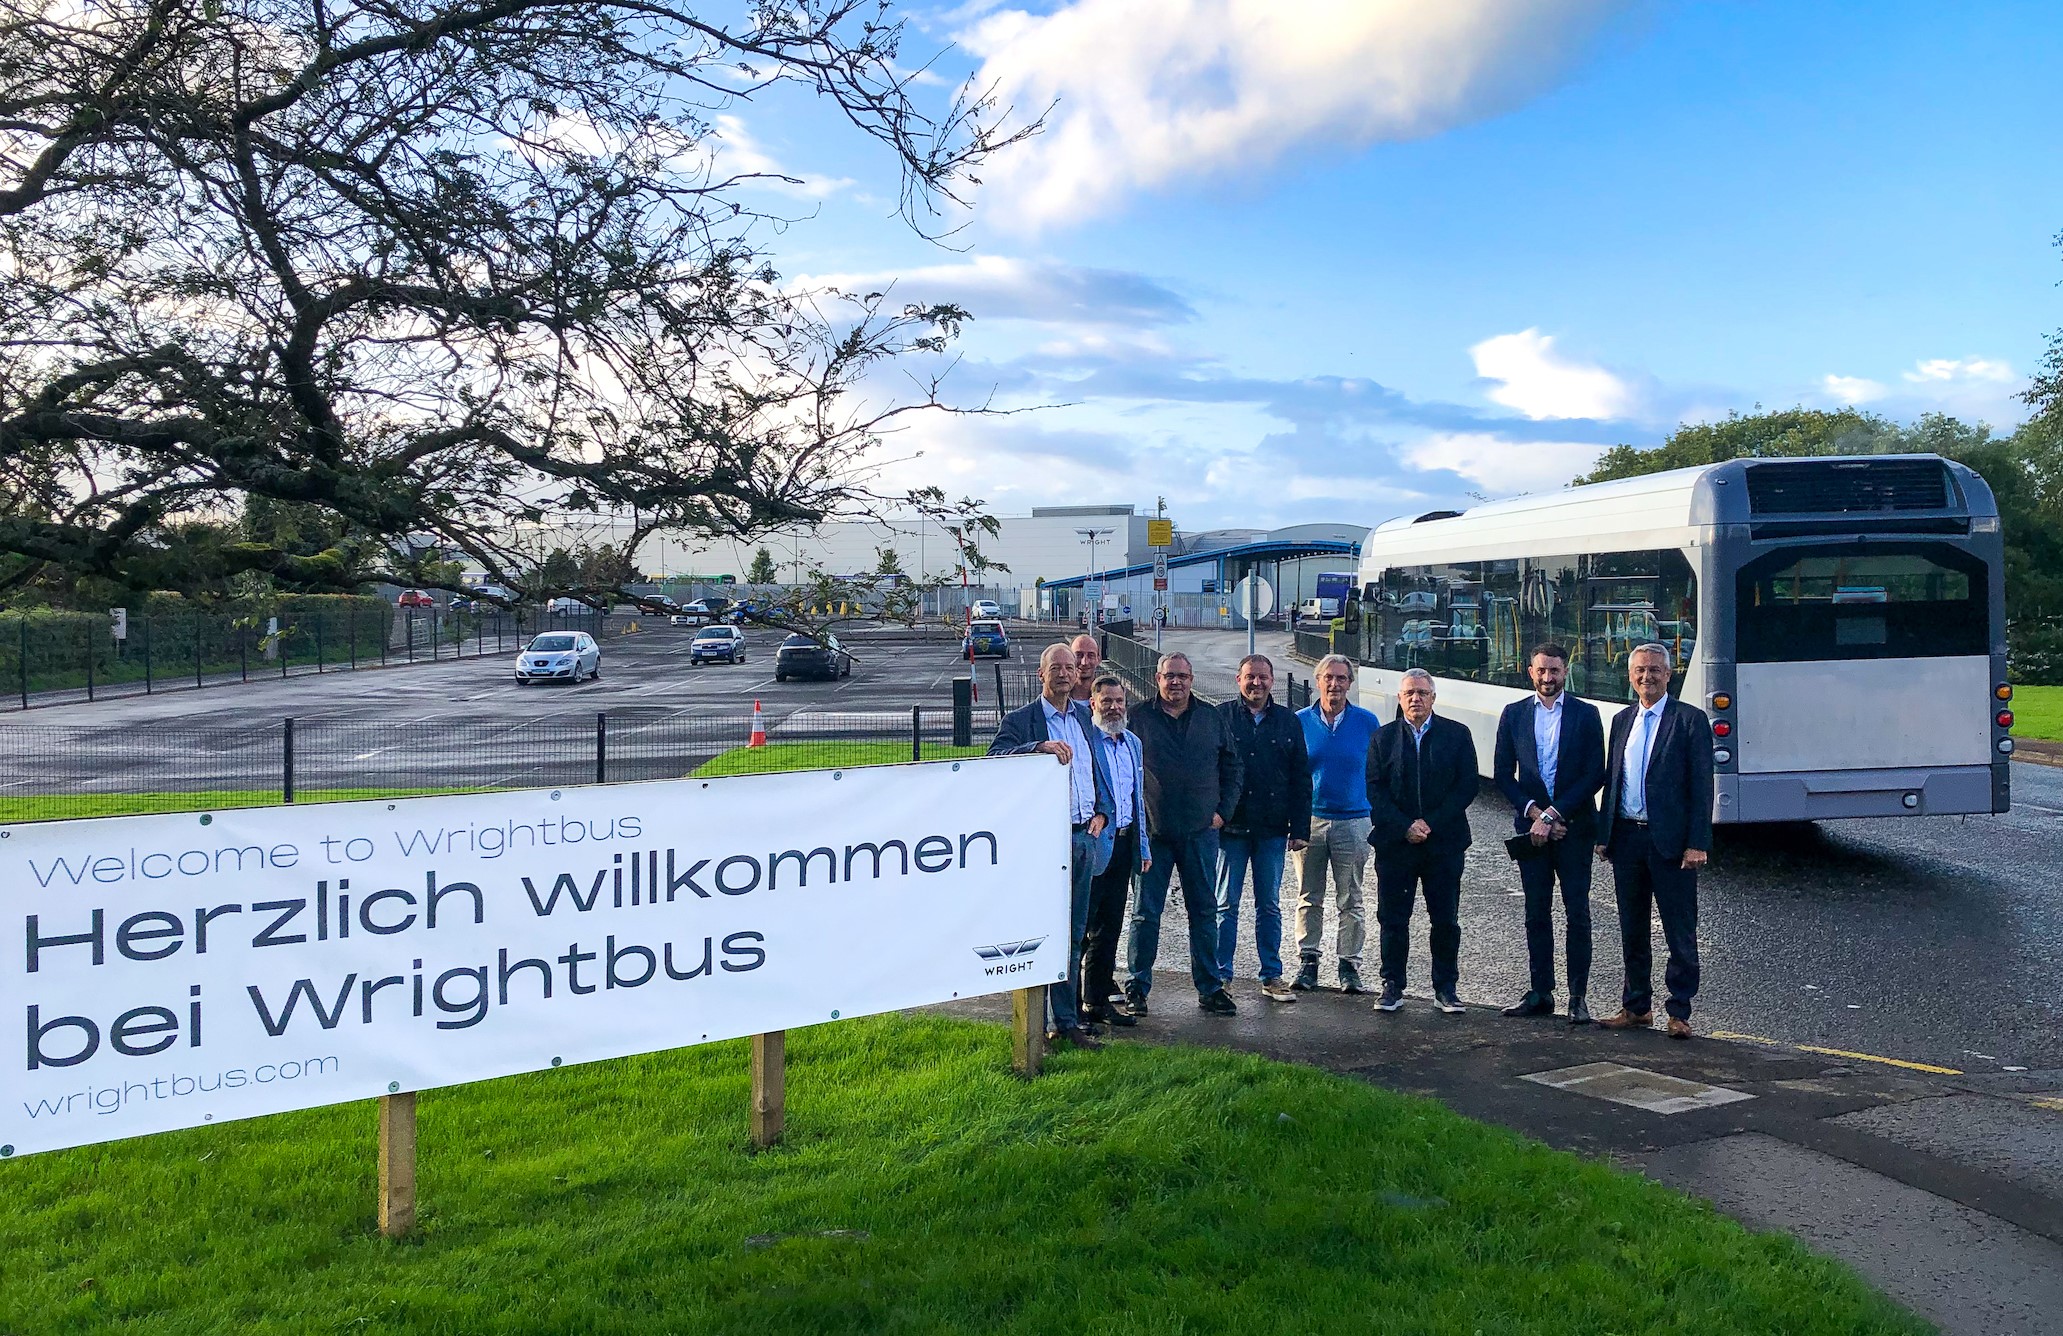 Germany is a particularly strong growth market for Wrightbus